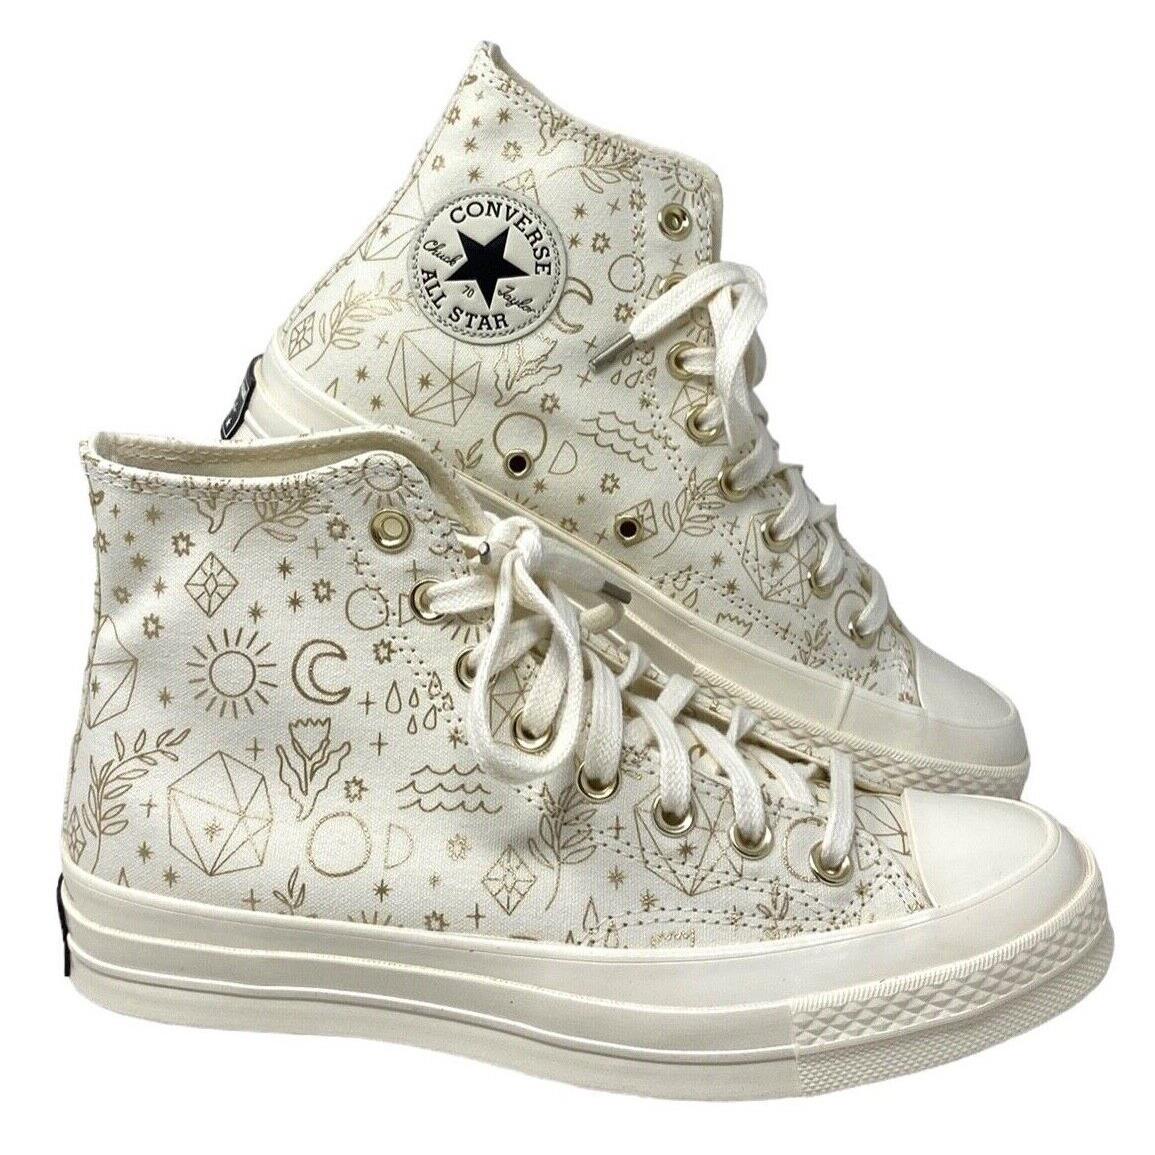 Converse Chuck 70 Shoes Casual Canvas Egret Women Size Sneakers High Top A02207C